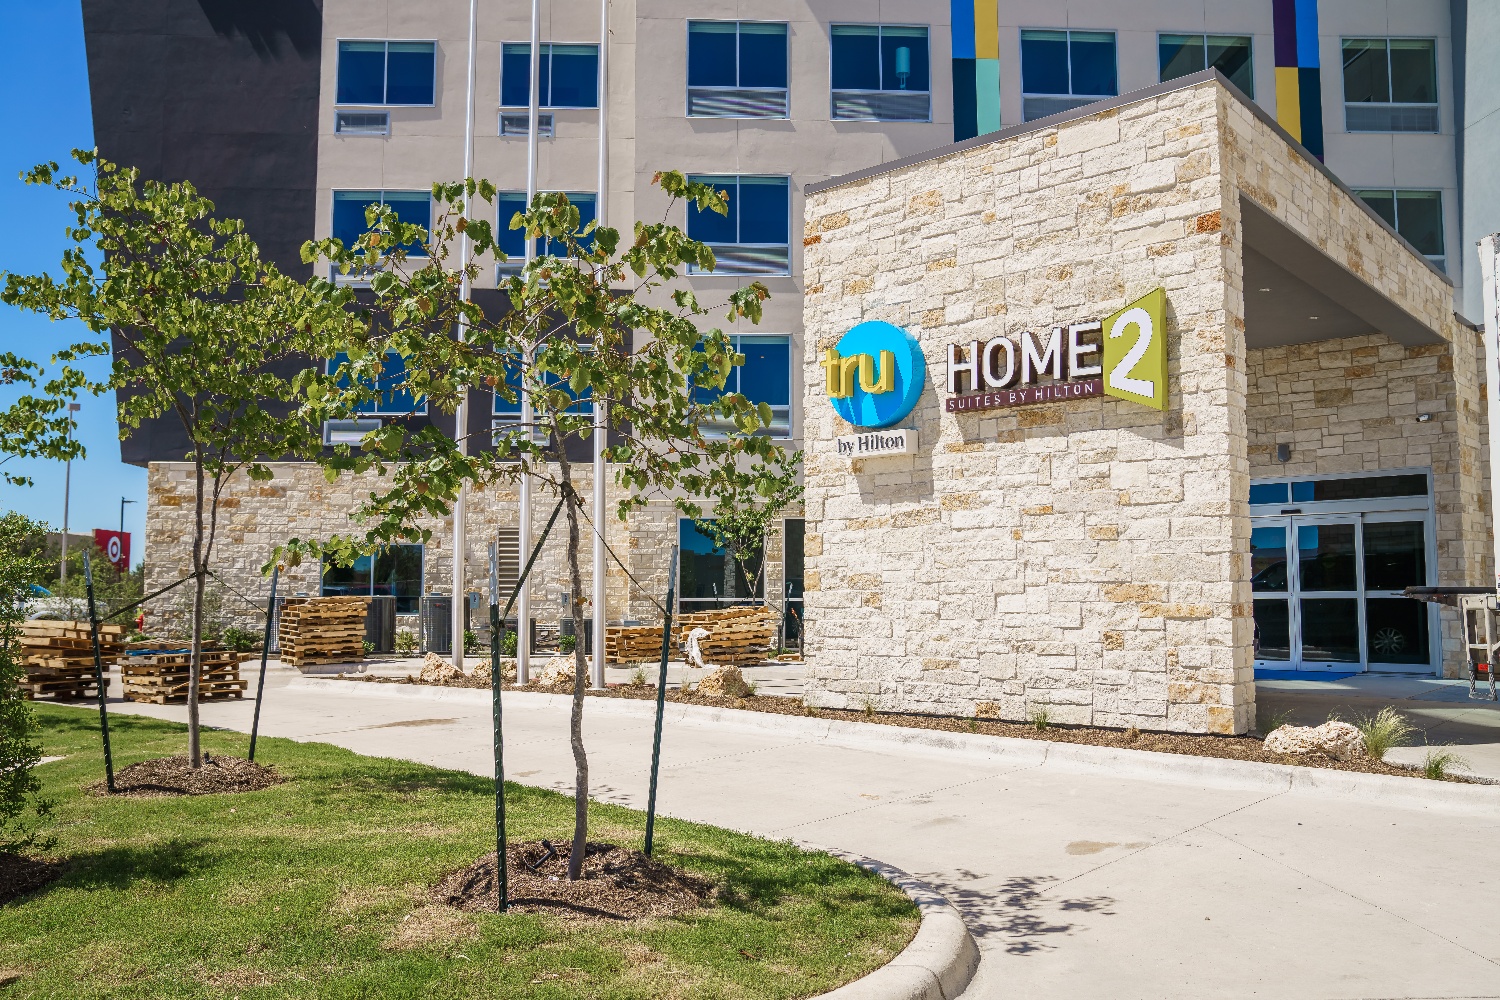 Tru and Home2 Suites by Hilton entrance and landscape in Texas